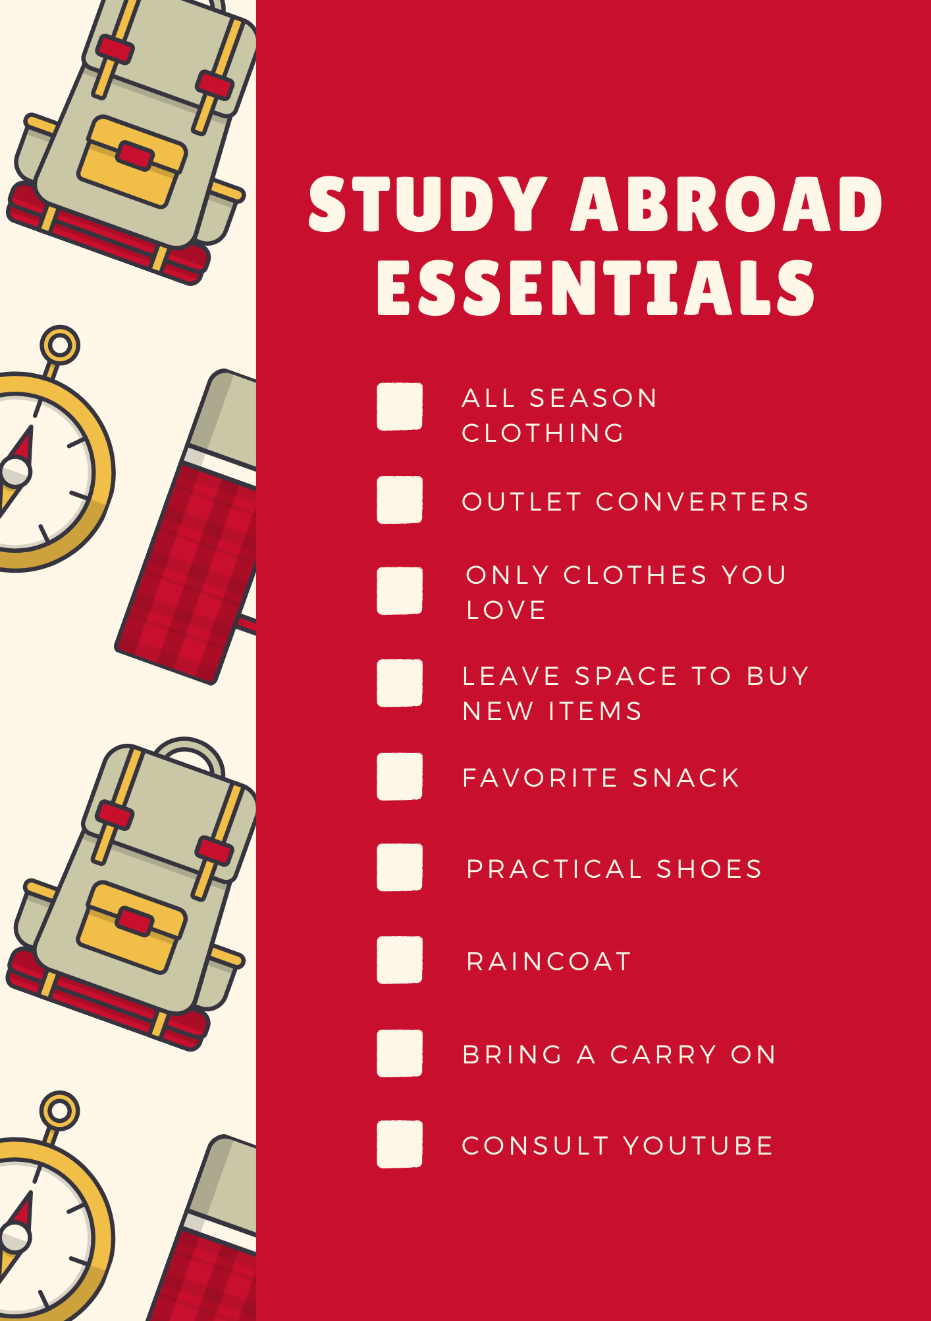 How to Pack Light for Study Abroad